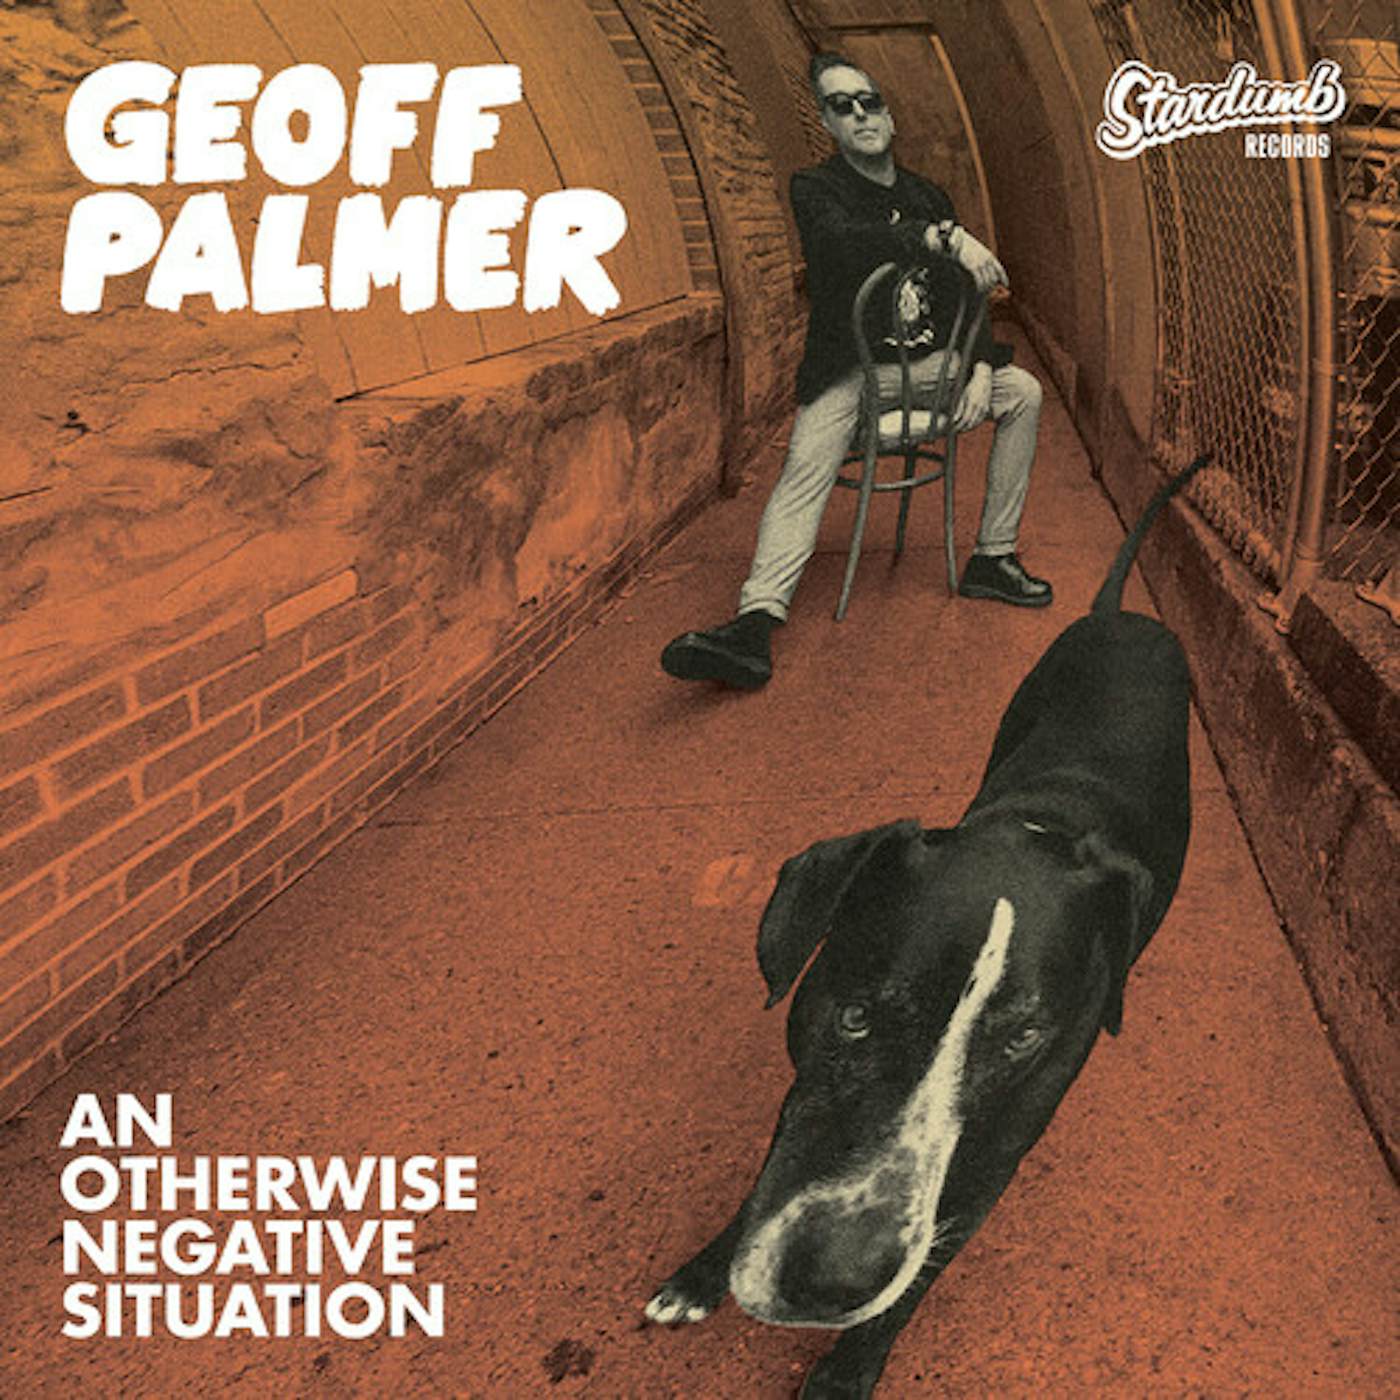 Geoff Palmer AN OTHERWISE NEGATIVE SITUATION CD